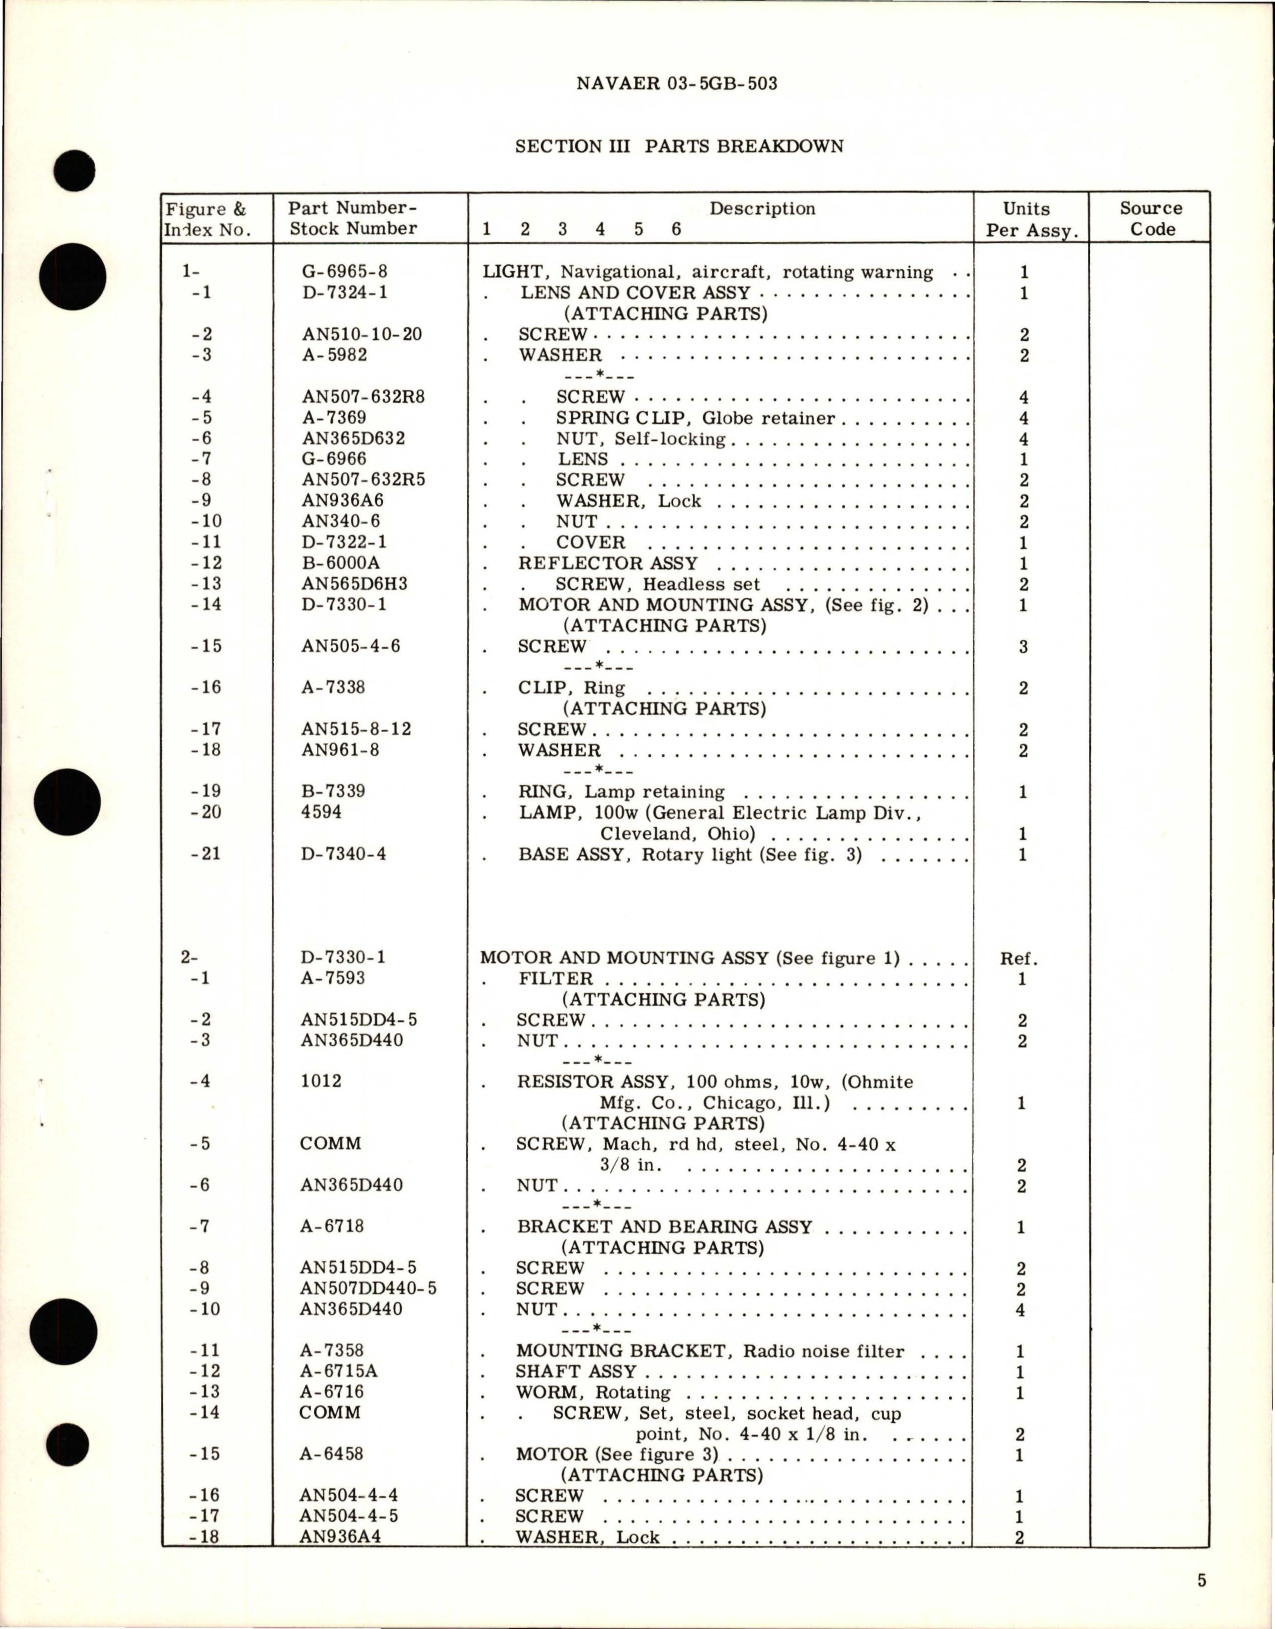 Sample page 5 from AirCorps Library document: Operation, Service and Overhaul Instructions with Parts Breakdown for Rotating Warning Navigational Light - Part G-6965-8